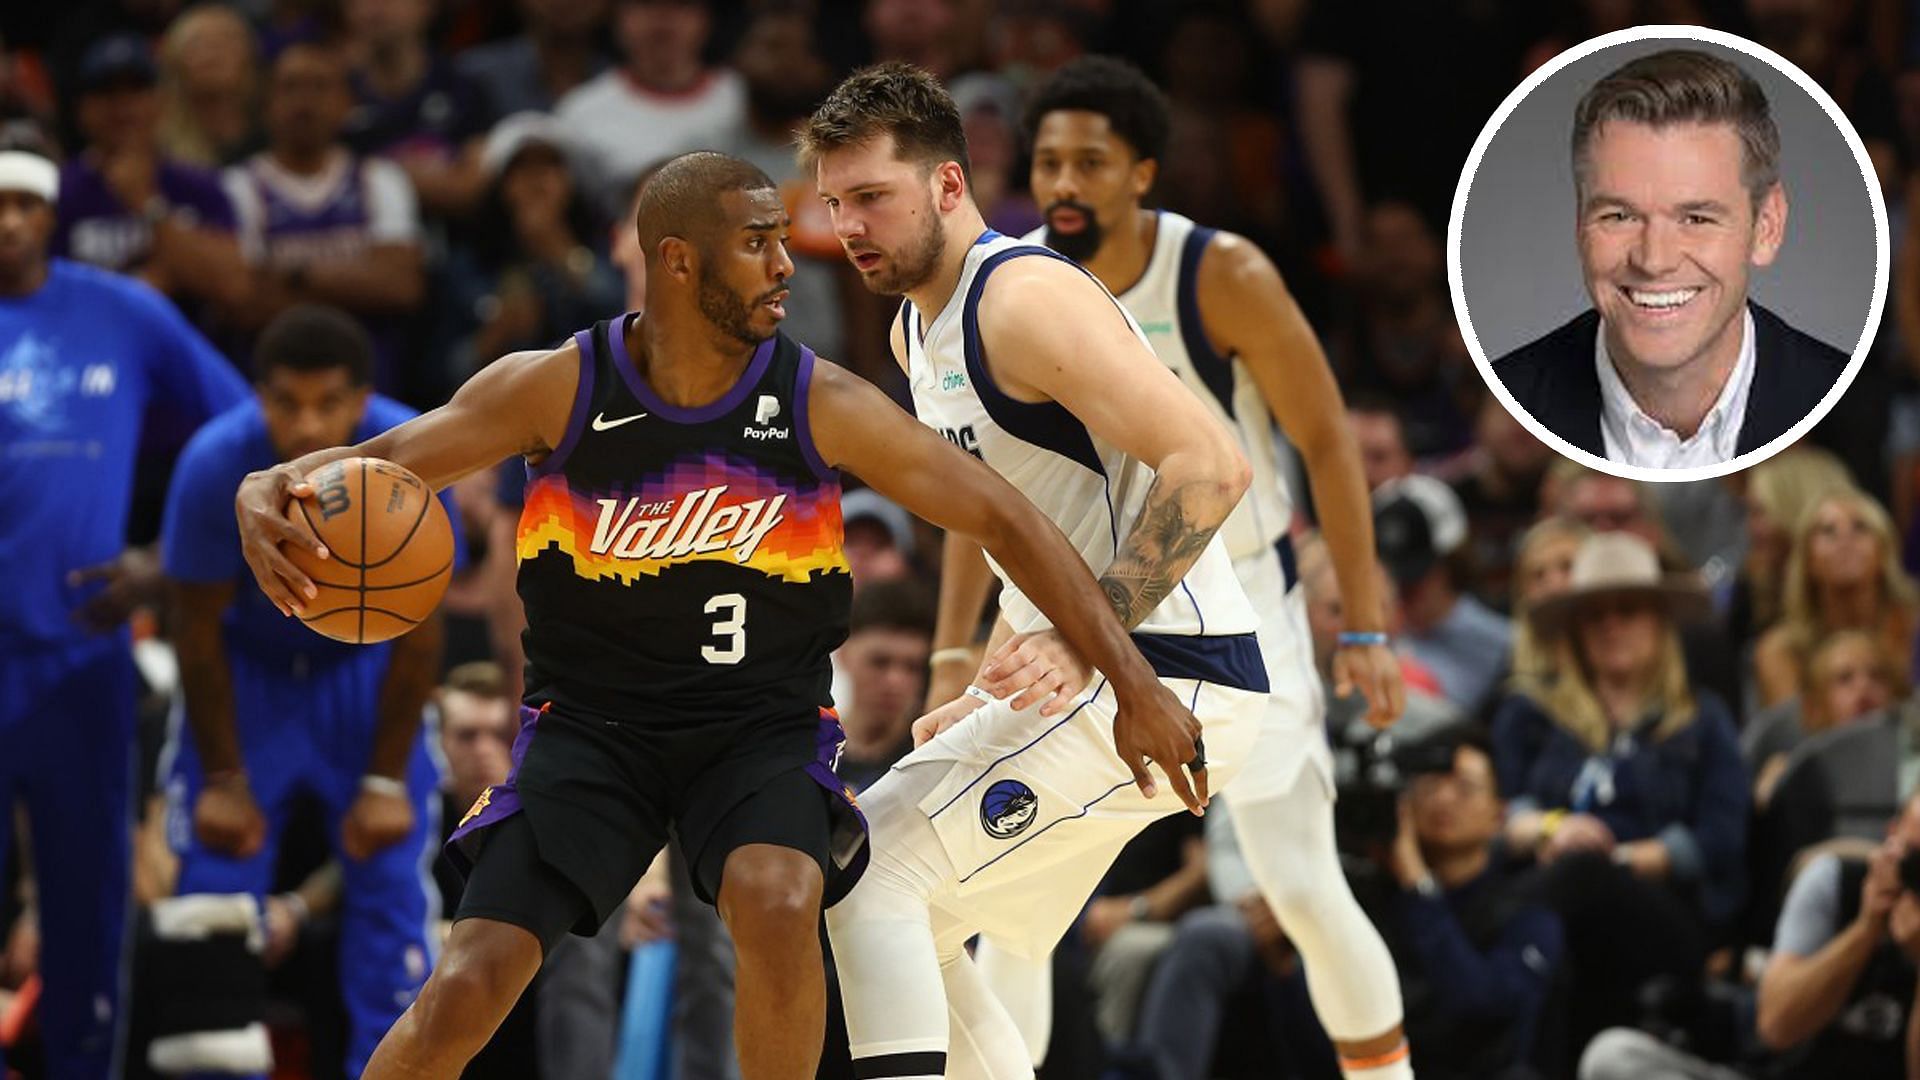 Kevin Wildes shared his assessment of Chris Paul on Twitter